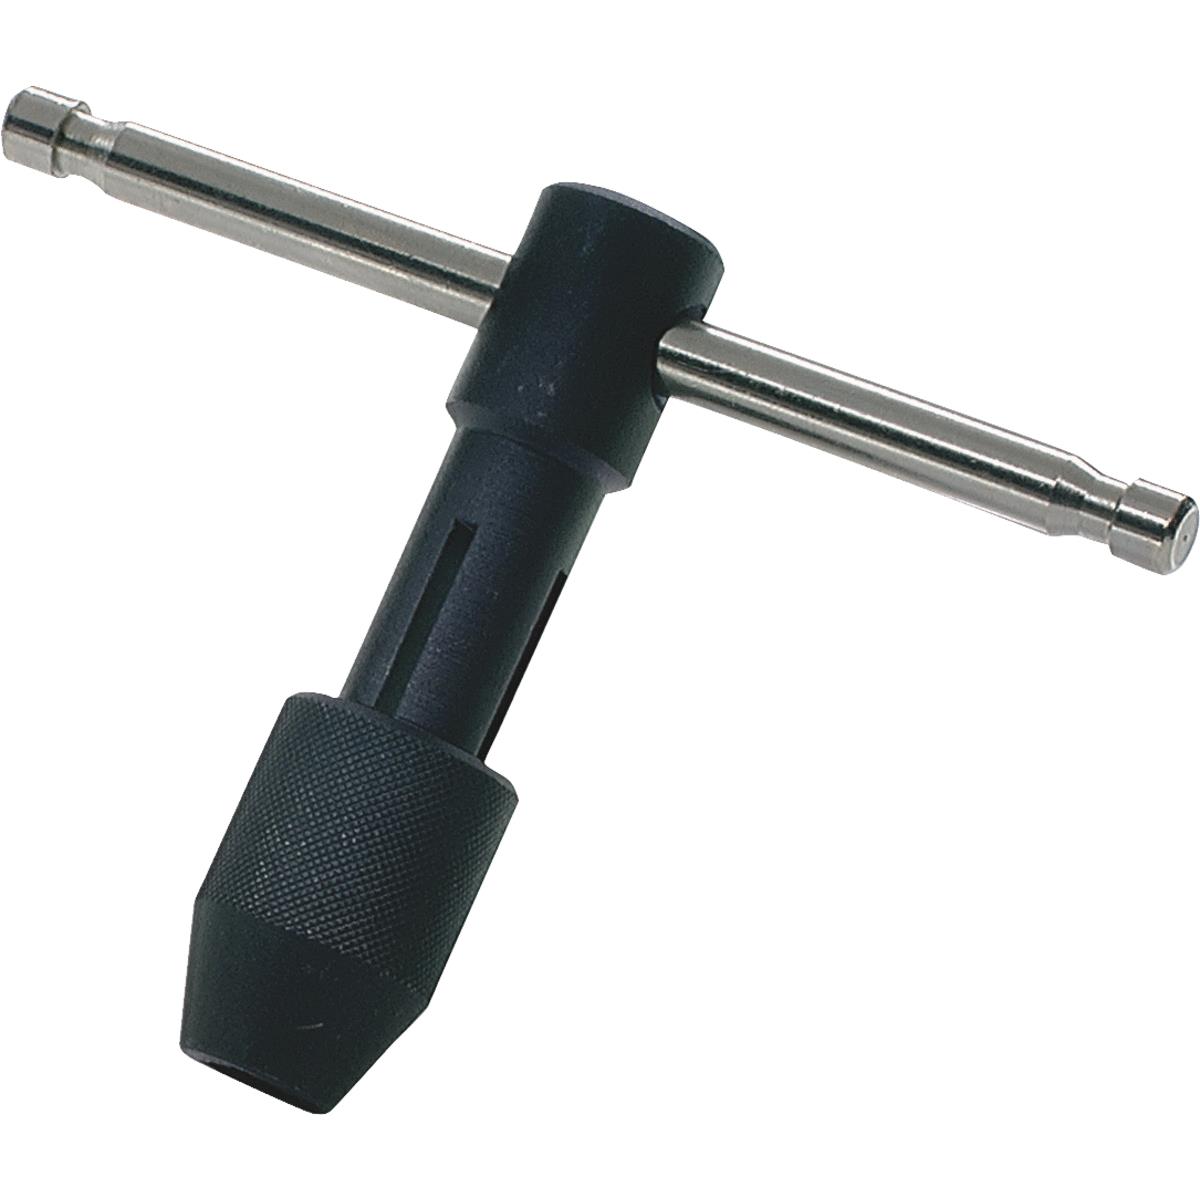 For Taps #0-1/4" Irwin Tools 12001ZR Hanson TR-1E T-Handle Tap Wrench